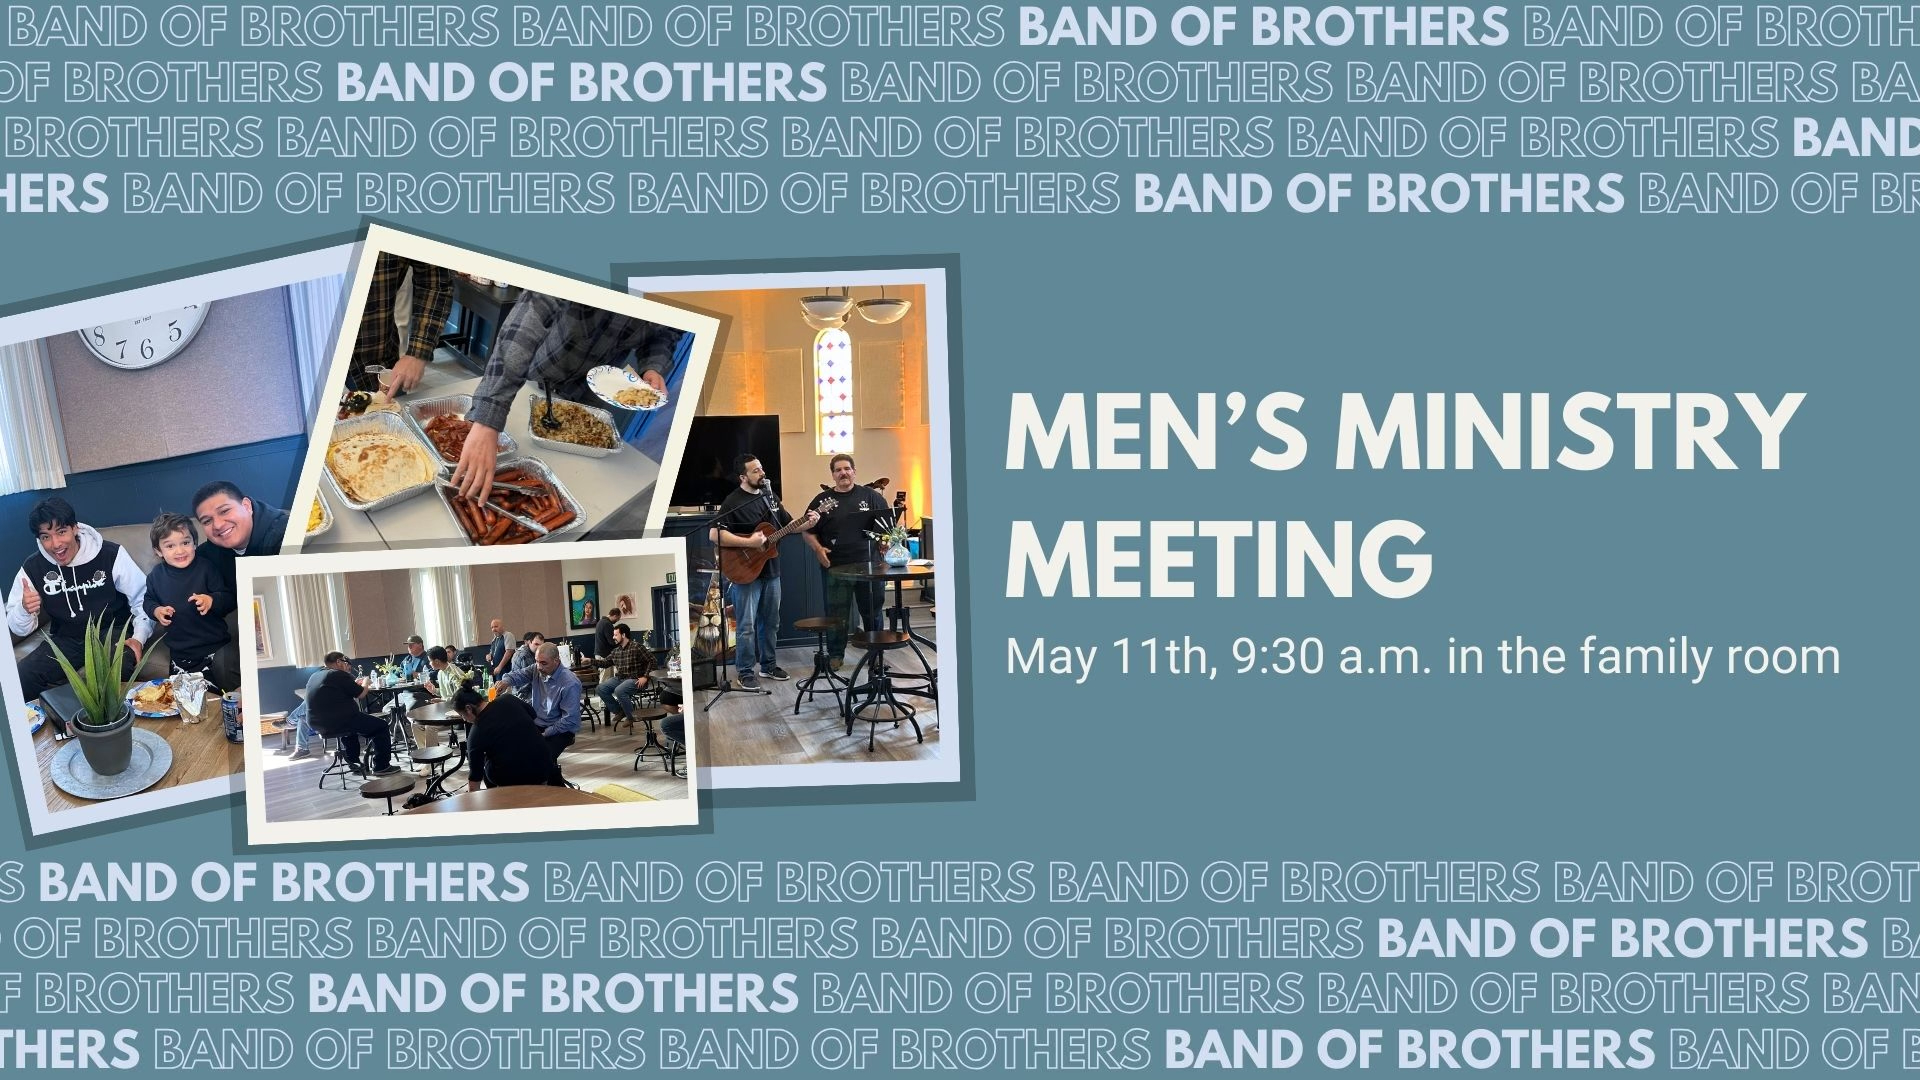 Men’s Ministry Meeting May 11th 9:30am